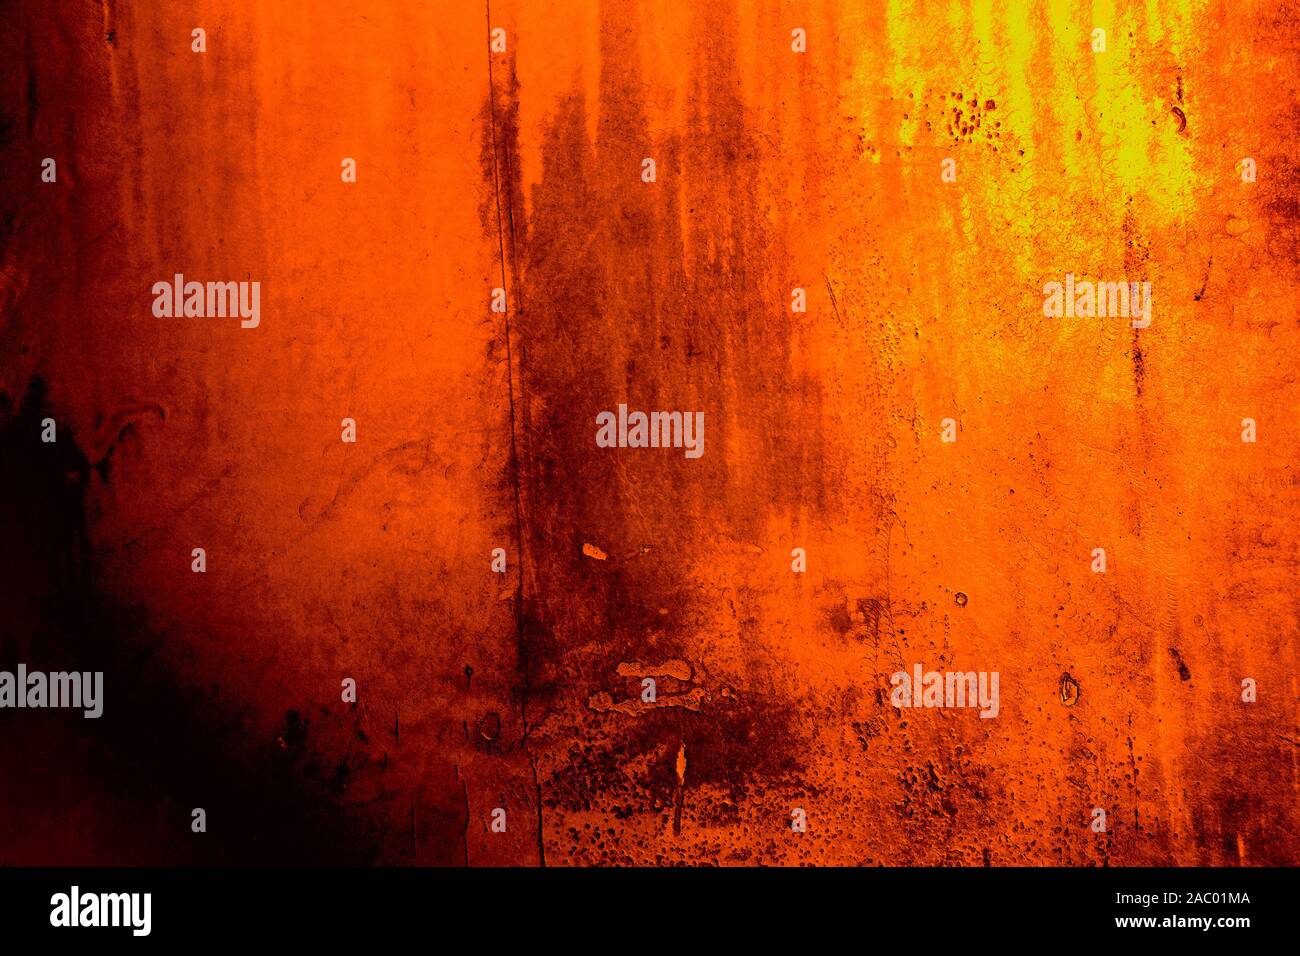 Orange colored background with textures of different shades of orange Stock Photo